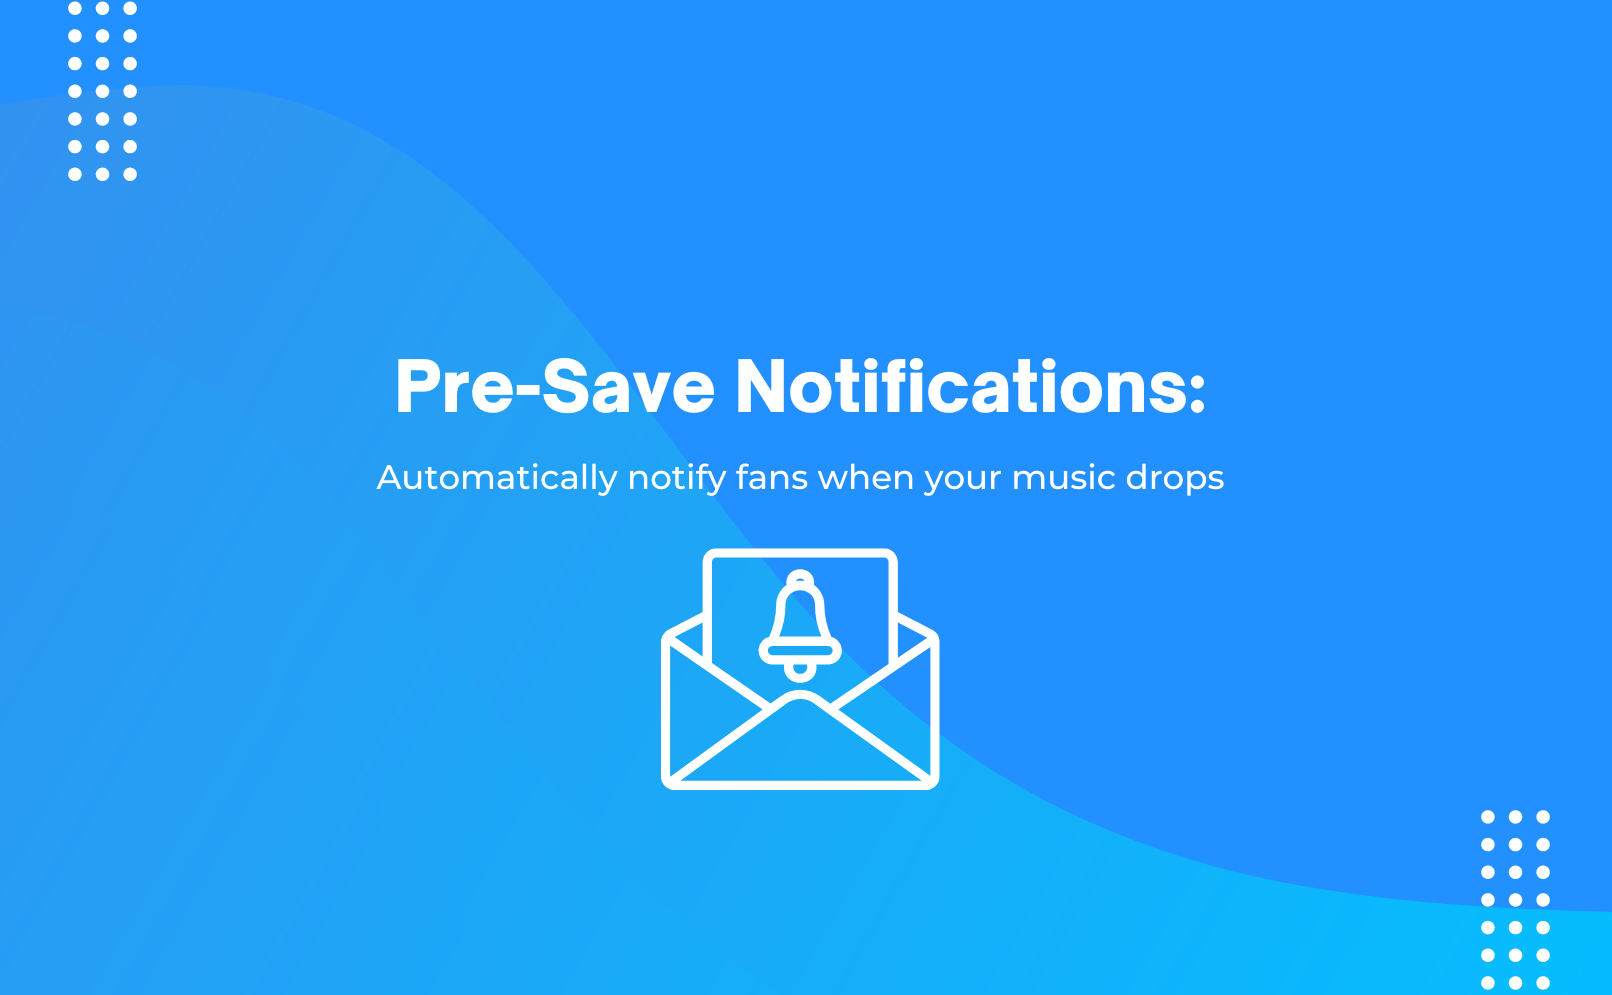 Pre-Save Notifications - Automatically notify fans when your music drops